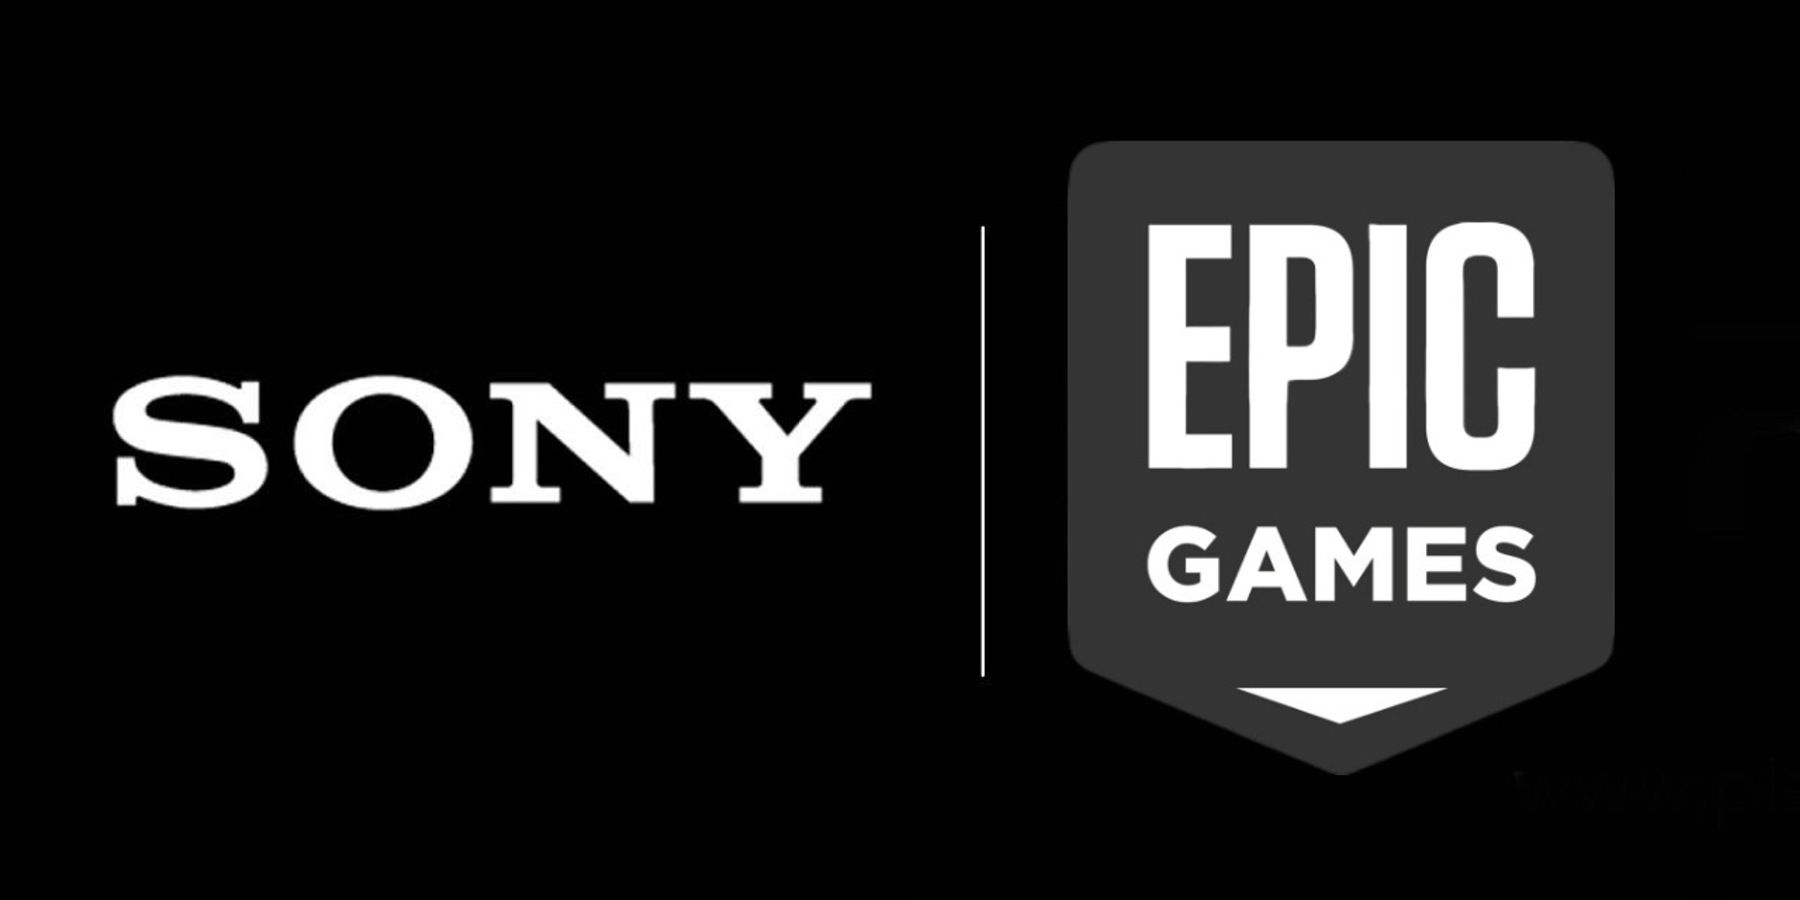 Sony Reportedly Preventing Epic Games From Passing Savings On to Customers